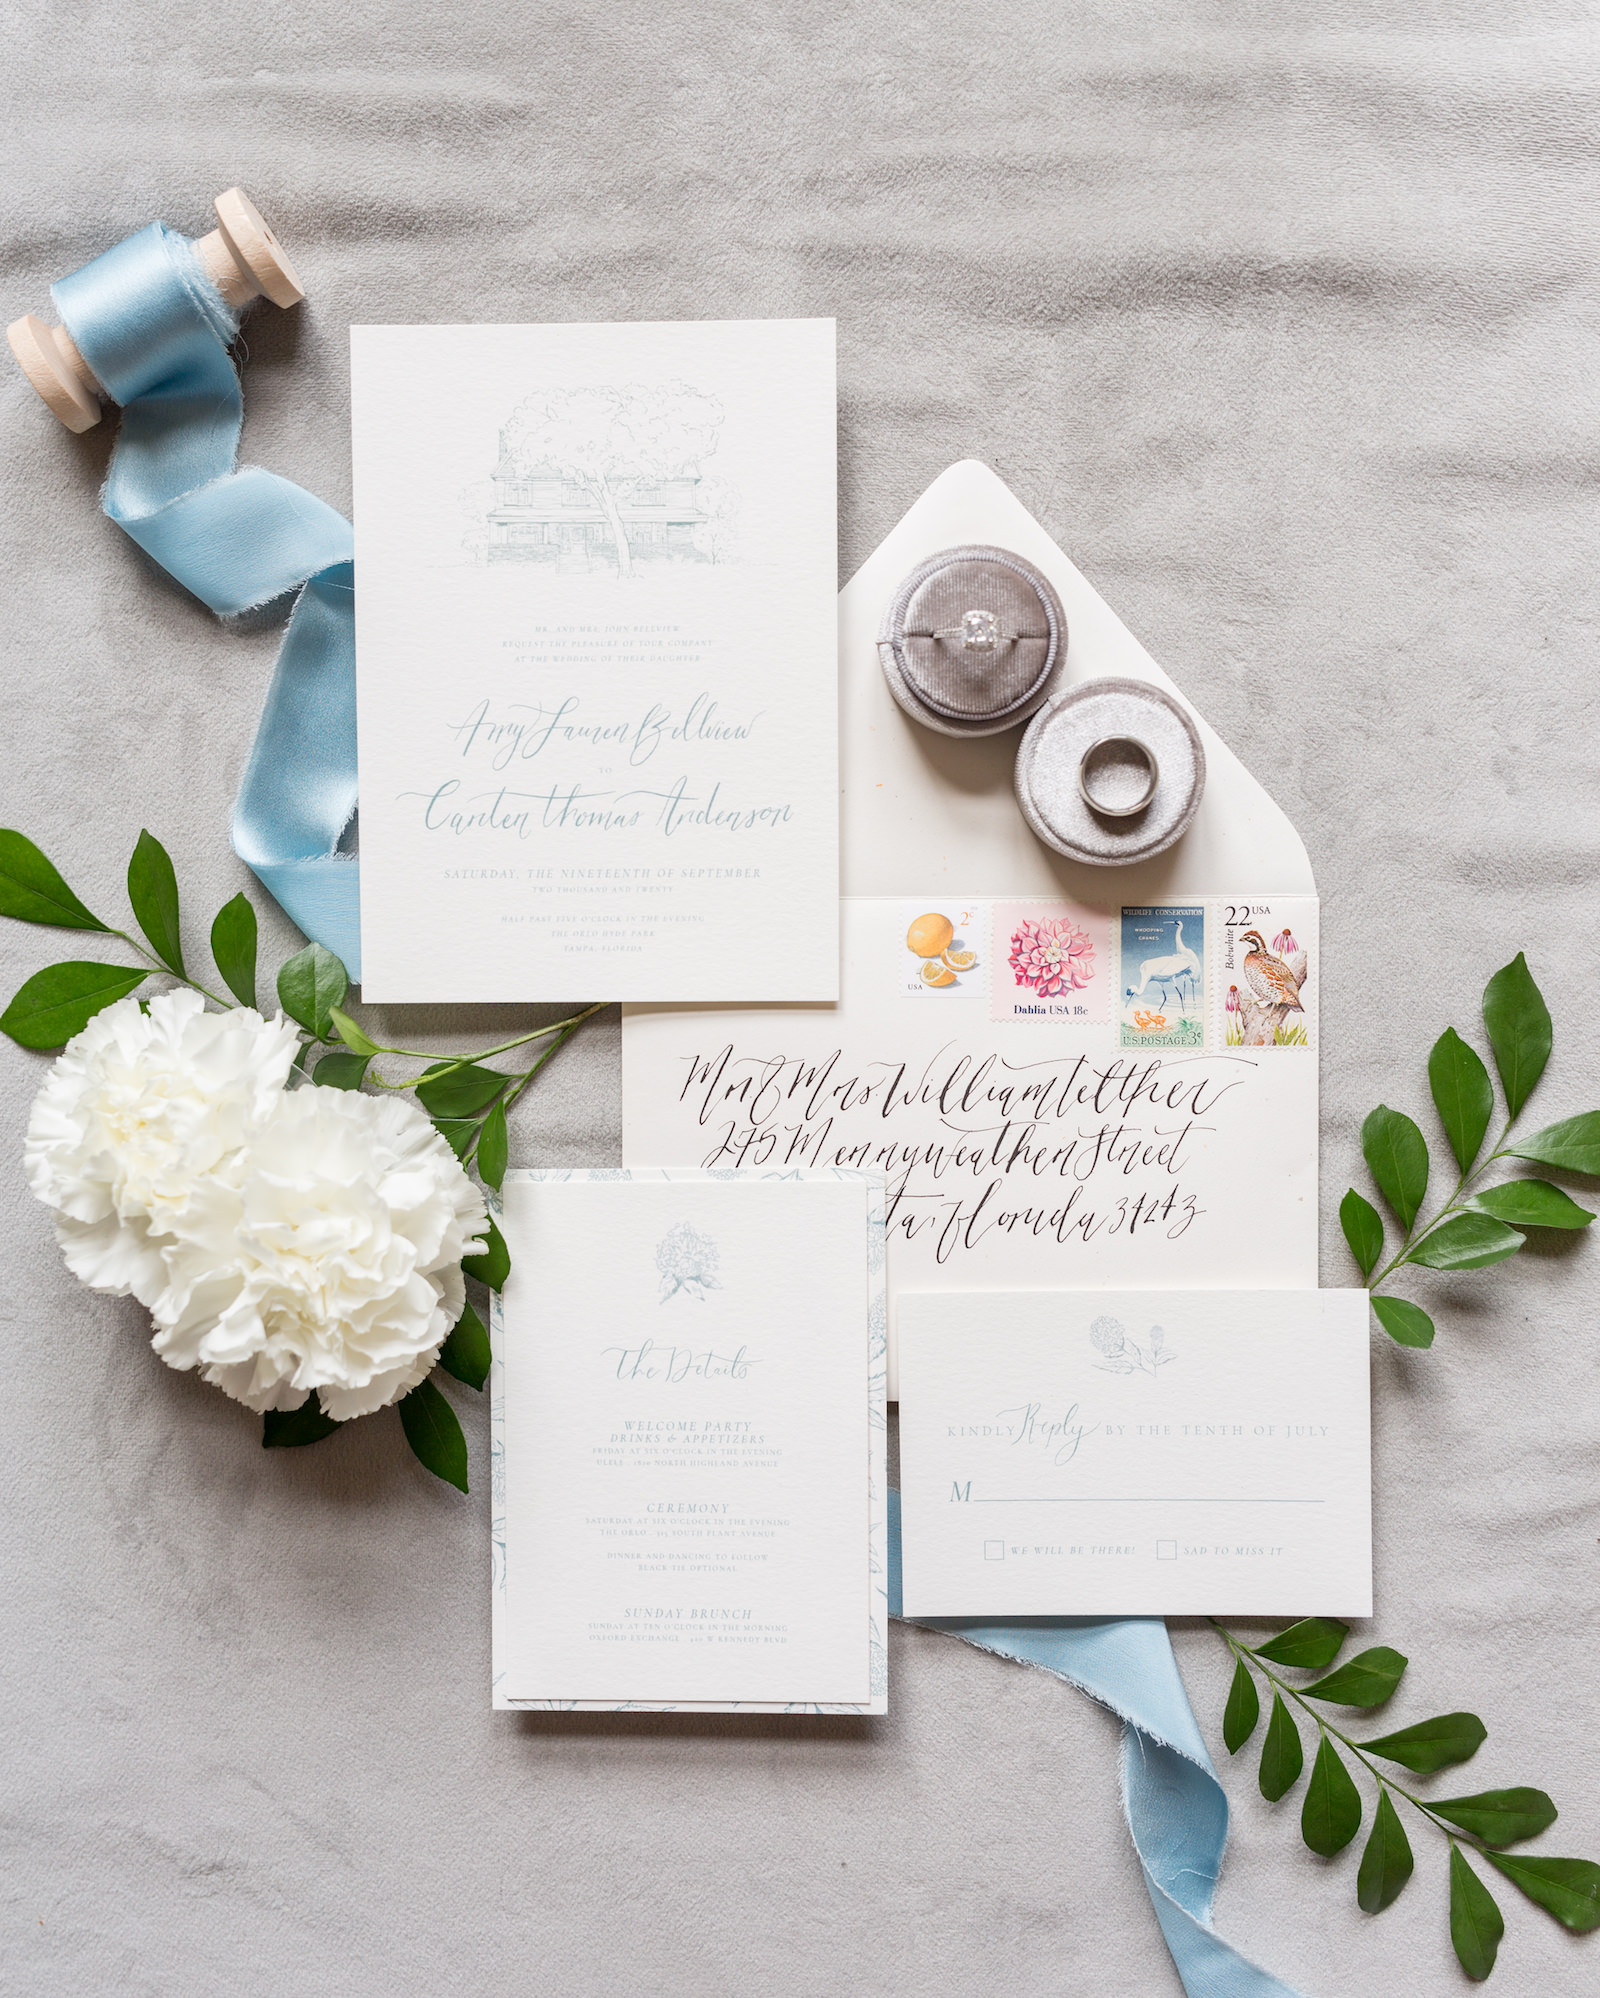 Classic and timeless white and dusty blue font